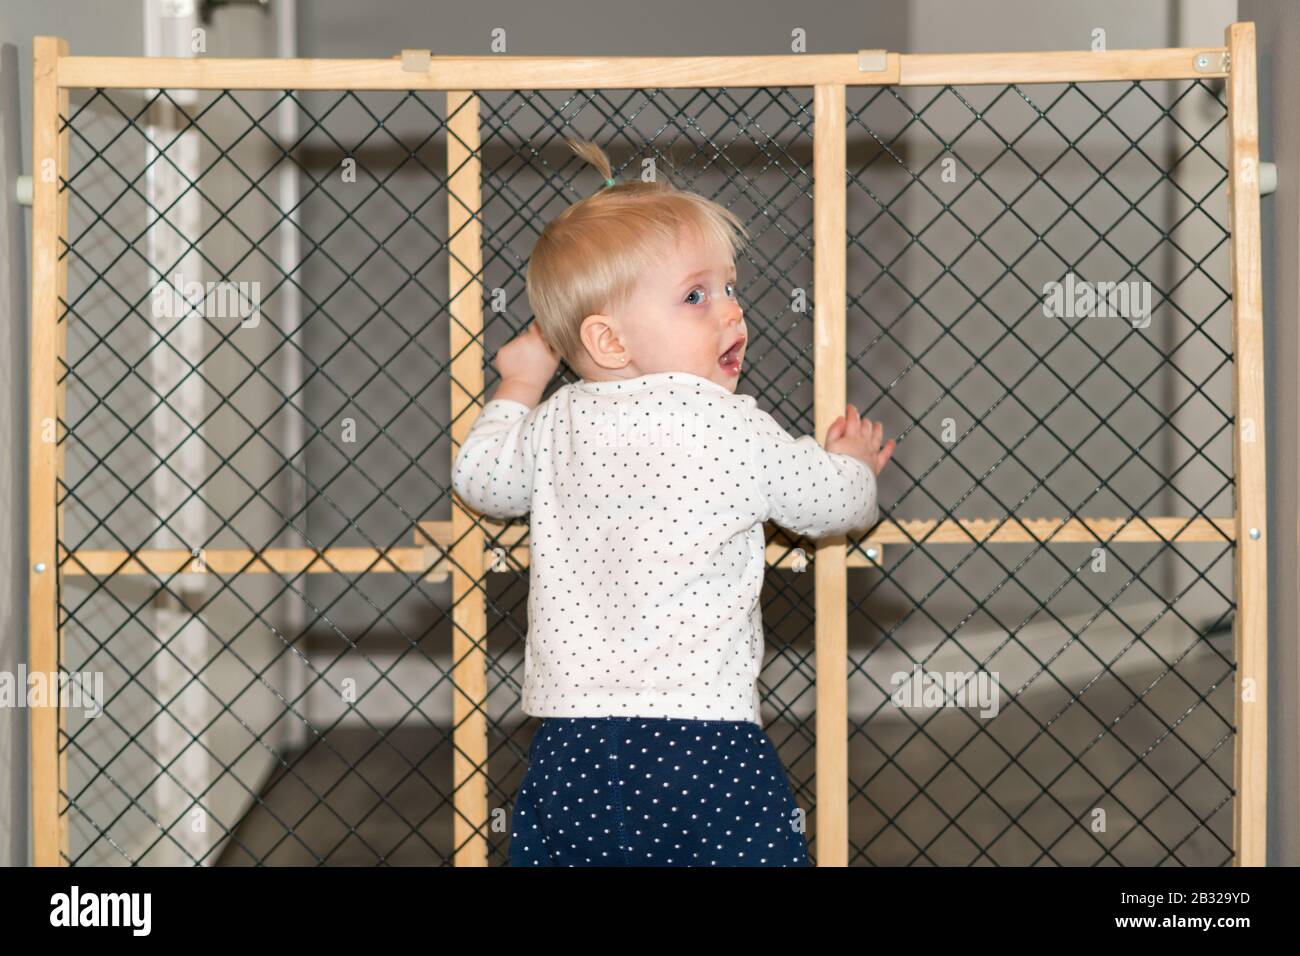 Cute Baby Exploring Child Proof Safety Gate at Home Stock Photo